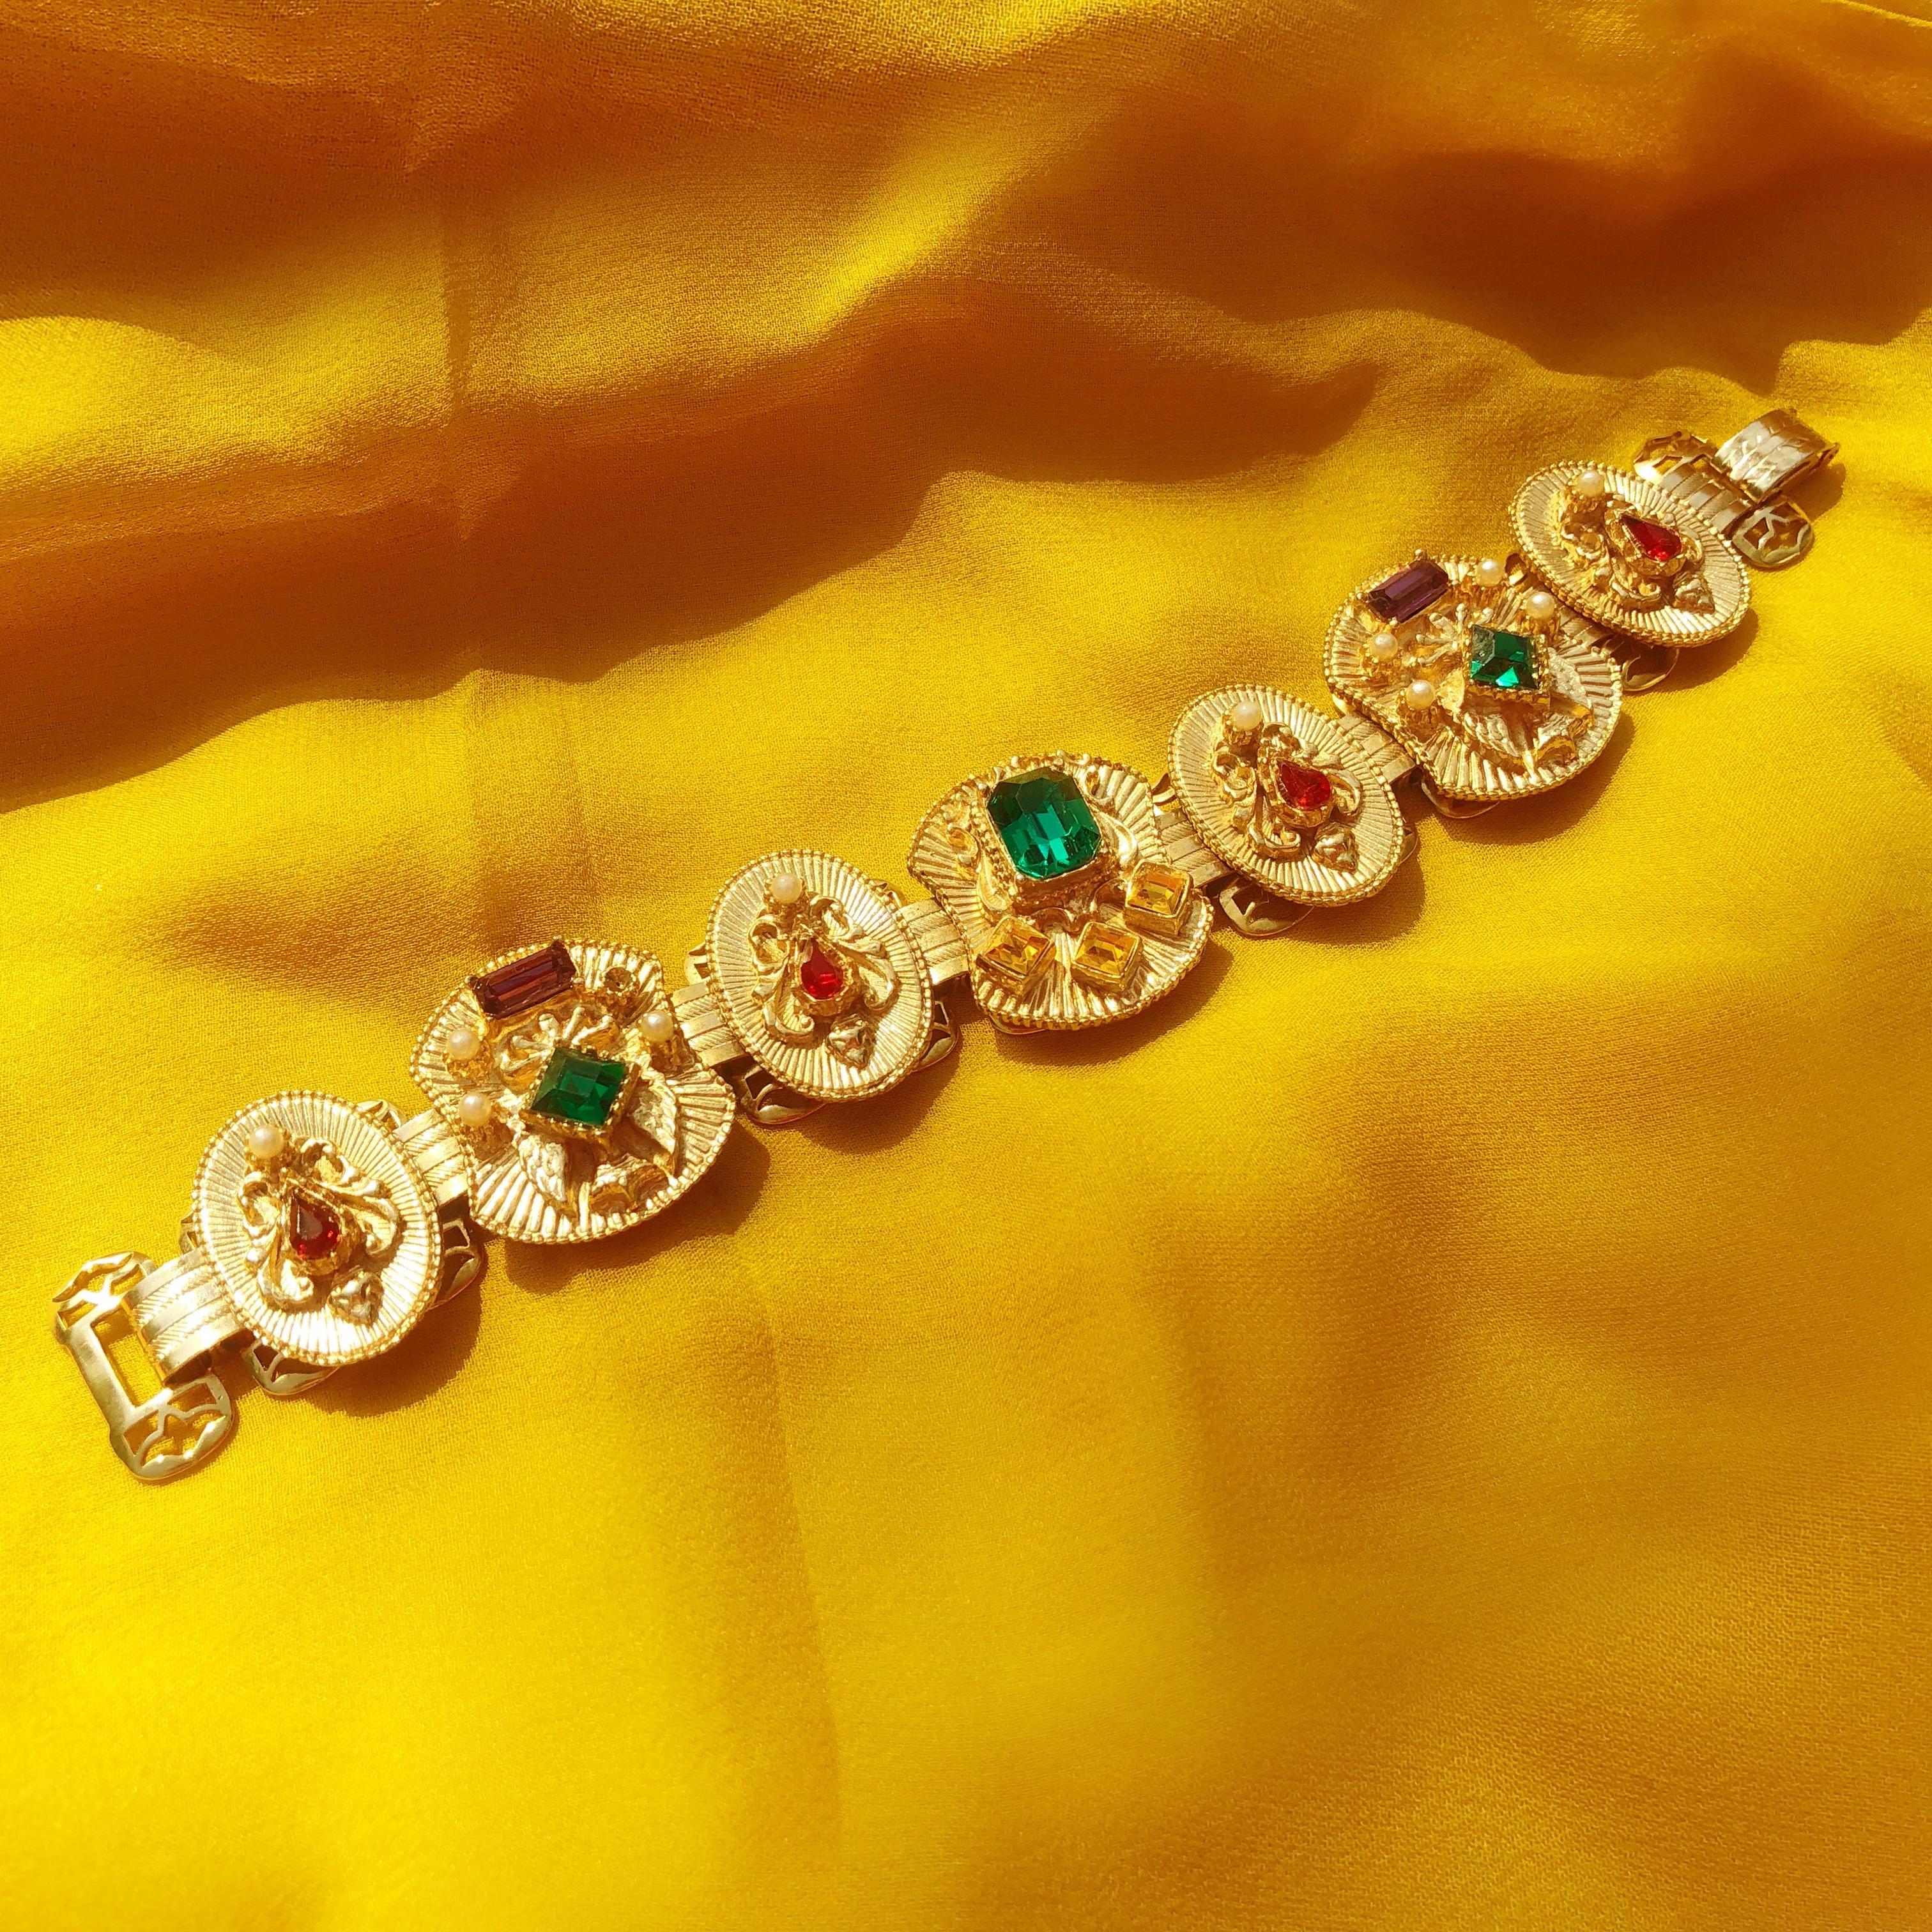 An absolutely gorgeous vintage gilded bookchain bracelet, circa 1960s; featuring seven gold-plated, rhinestone jeweled panels. Accented with tiny pearls and faceted crystal rhinestones in Emerald, Ruby, Amethyst and Topaz colors. An ornate piece to